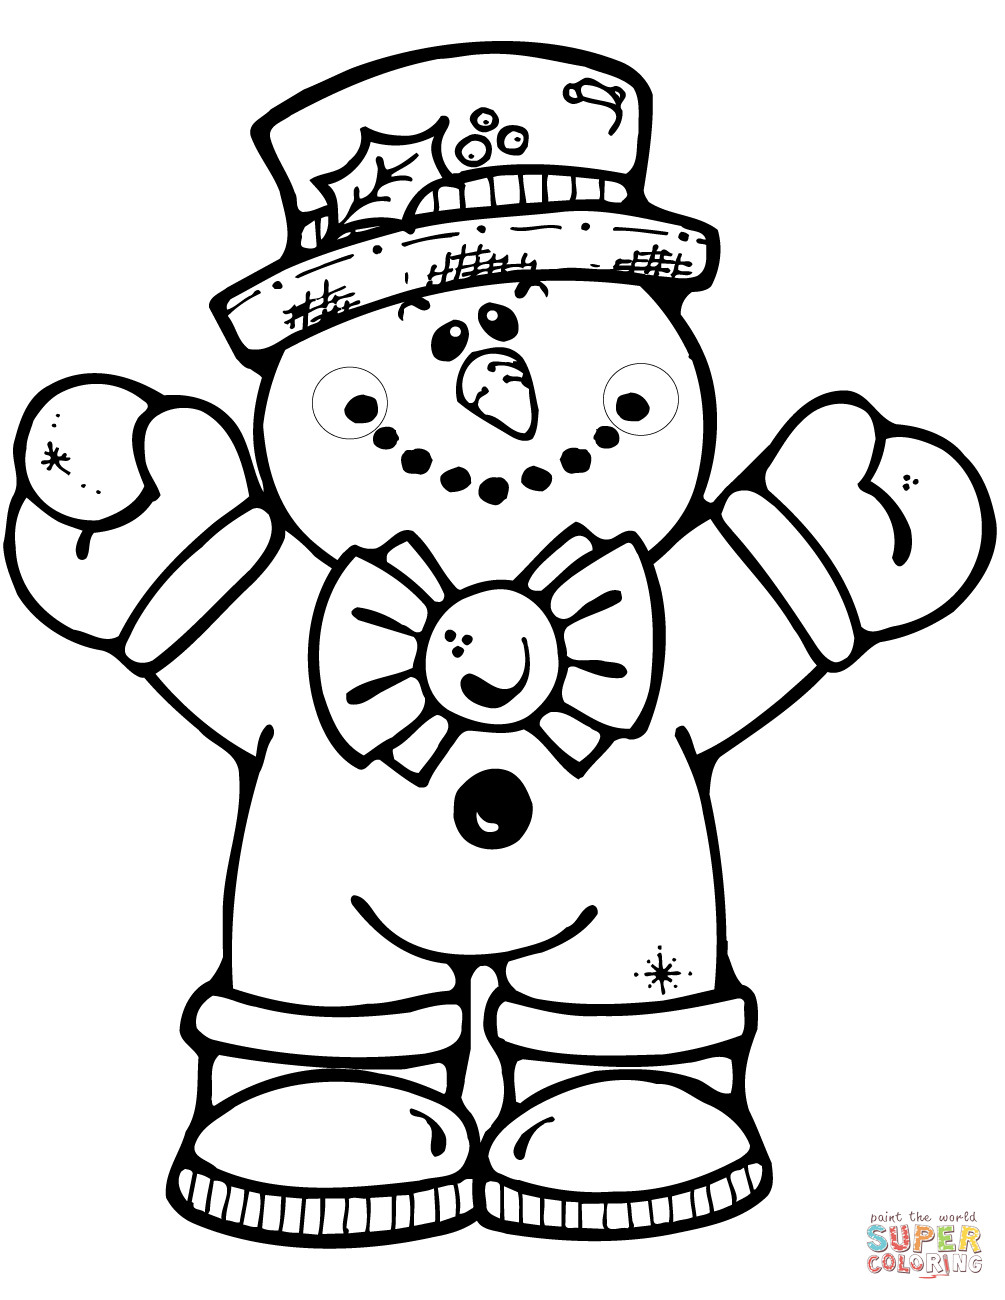 Snowman Printable Coloring Pages
 Hugging Snowman coloring page